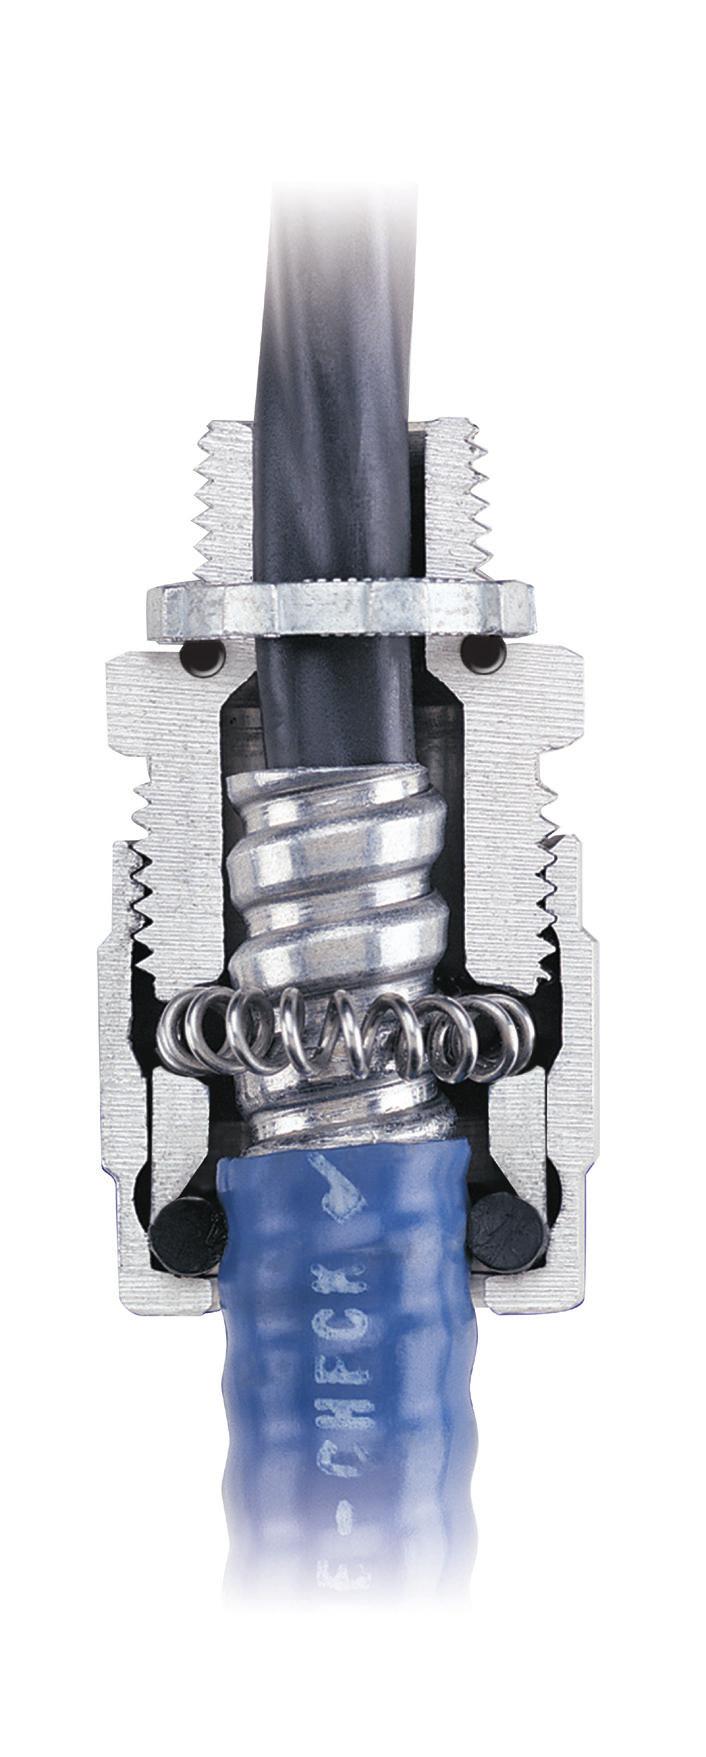 TEK TM Teck able Fittings Parts and omponents The fitting body has an integral bevelled armour stop to facilitate the cable insertion The internal components are held captive inside the gland nut.